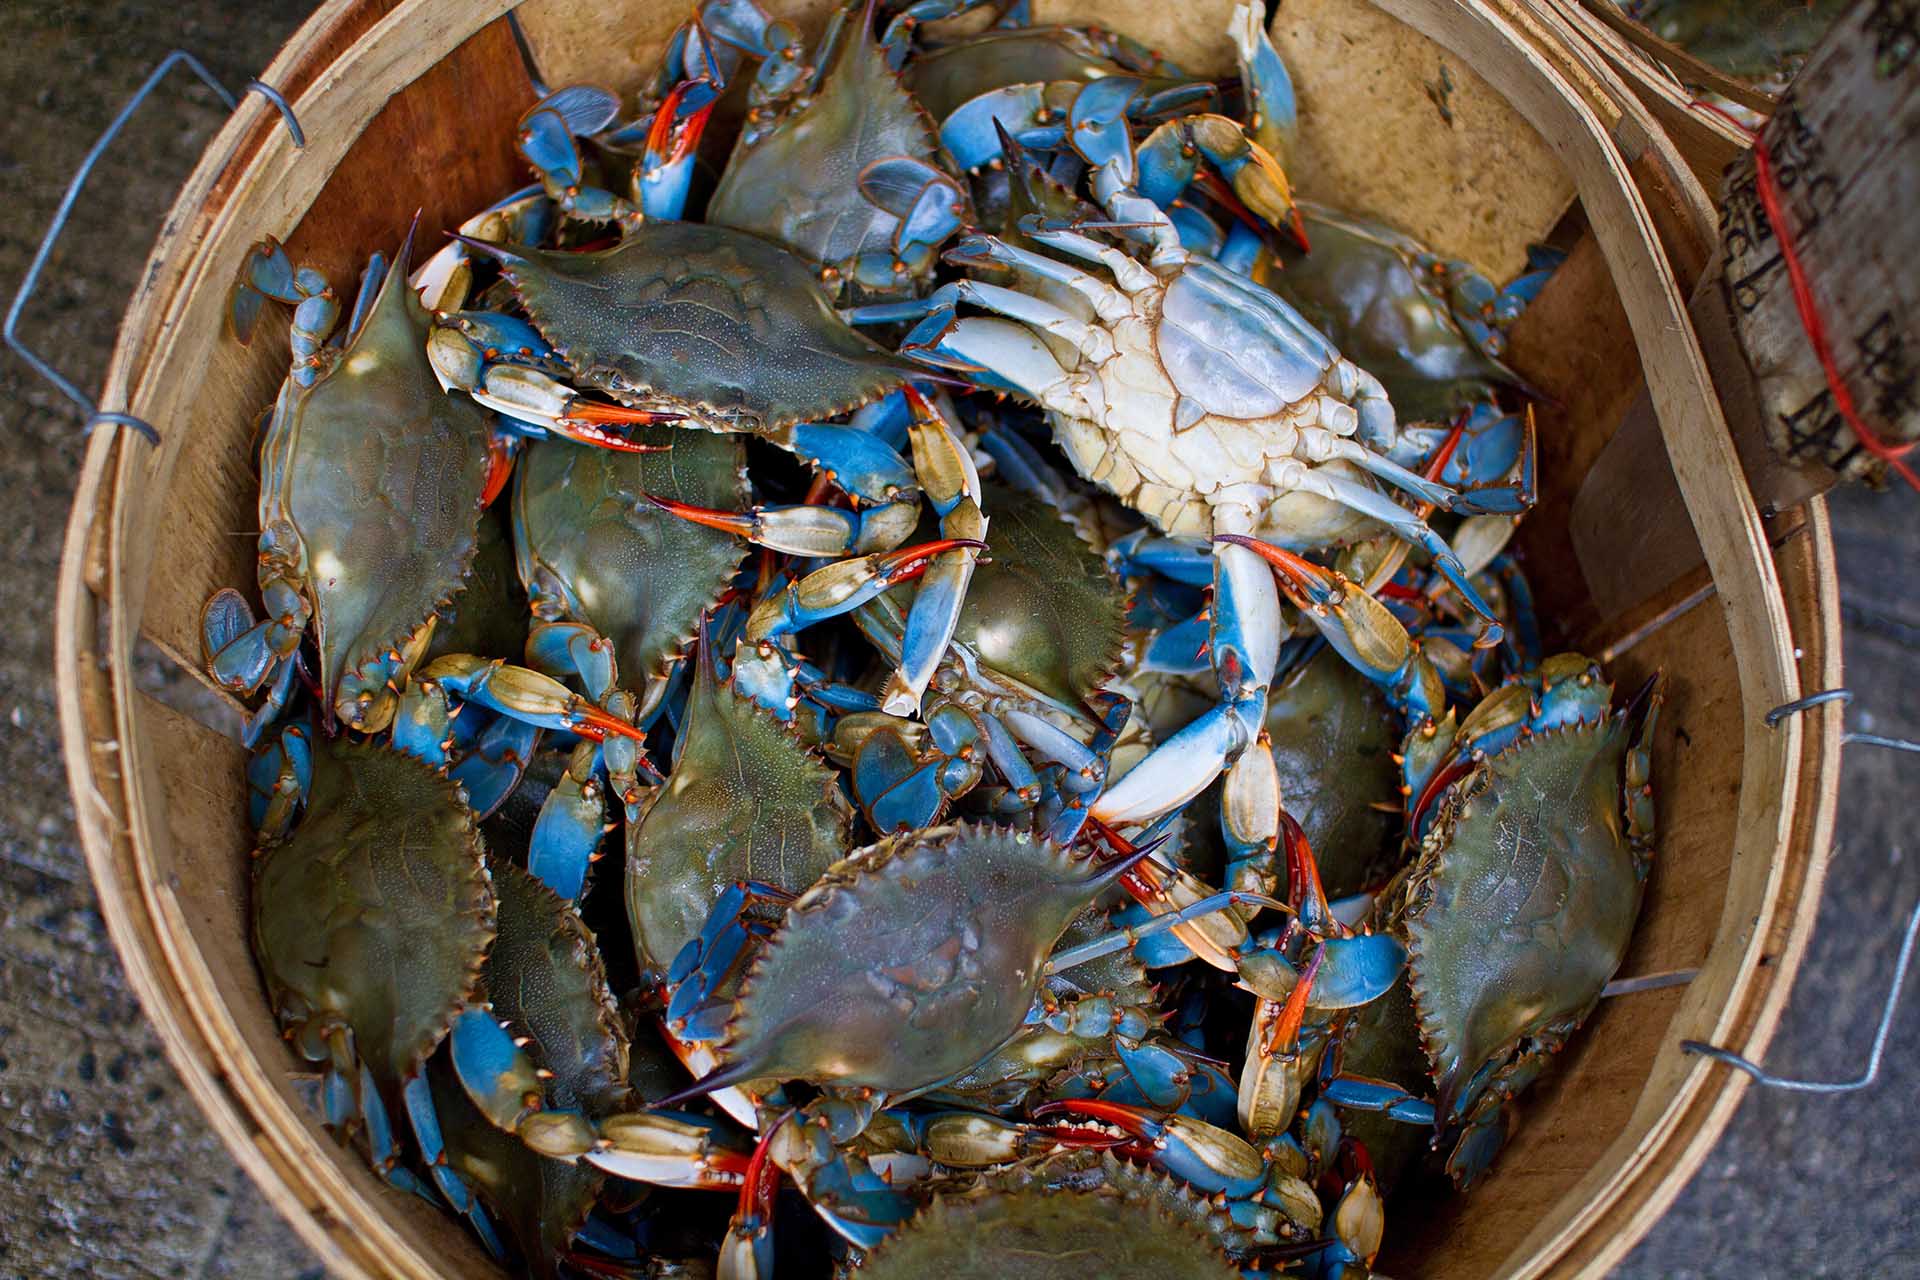 Blue crabs in a large bucket